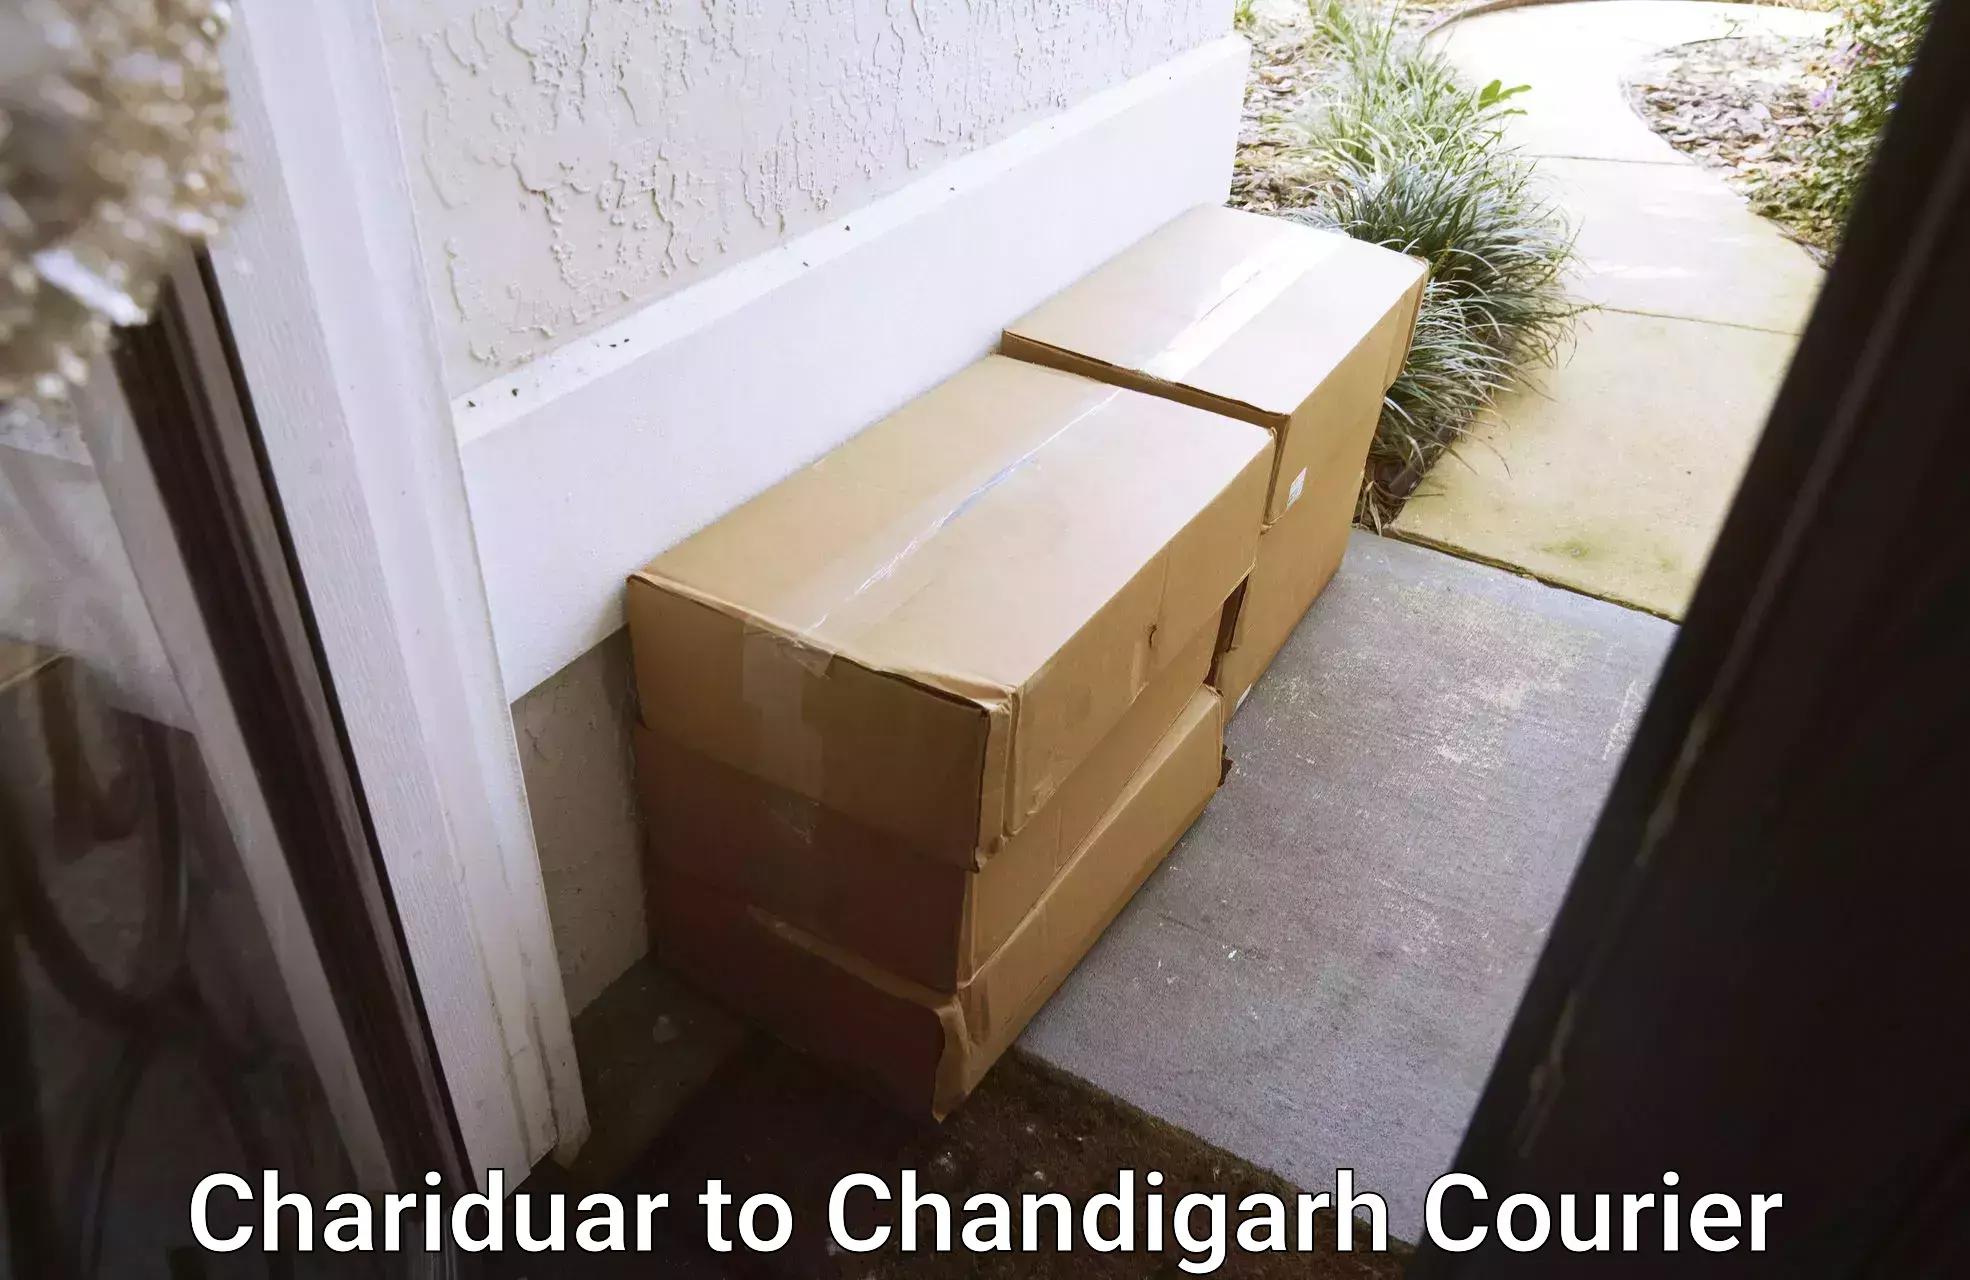 Courier service innovation in Chariduar to Chandigarh